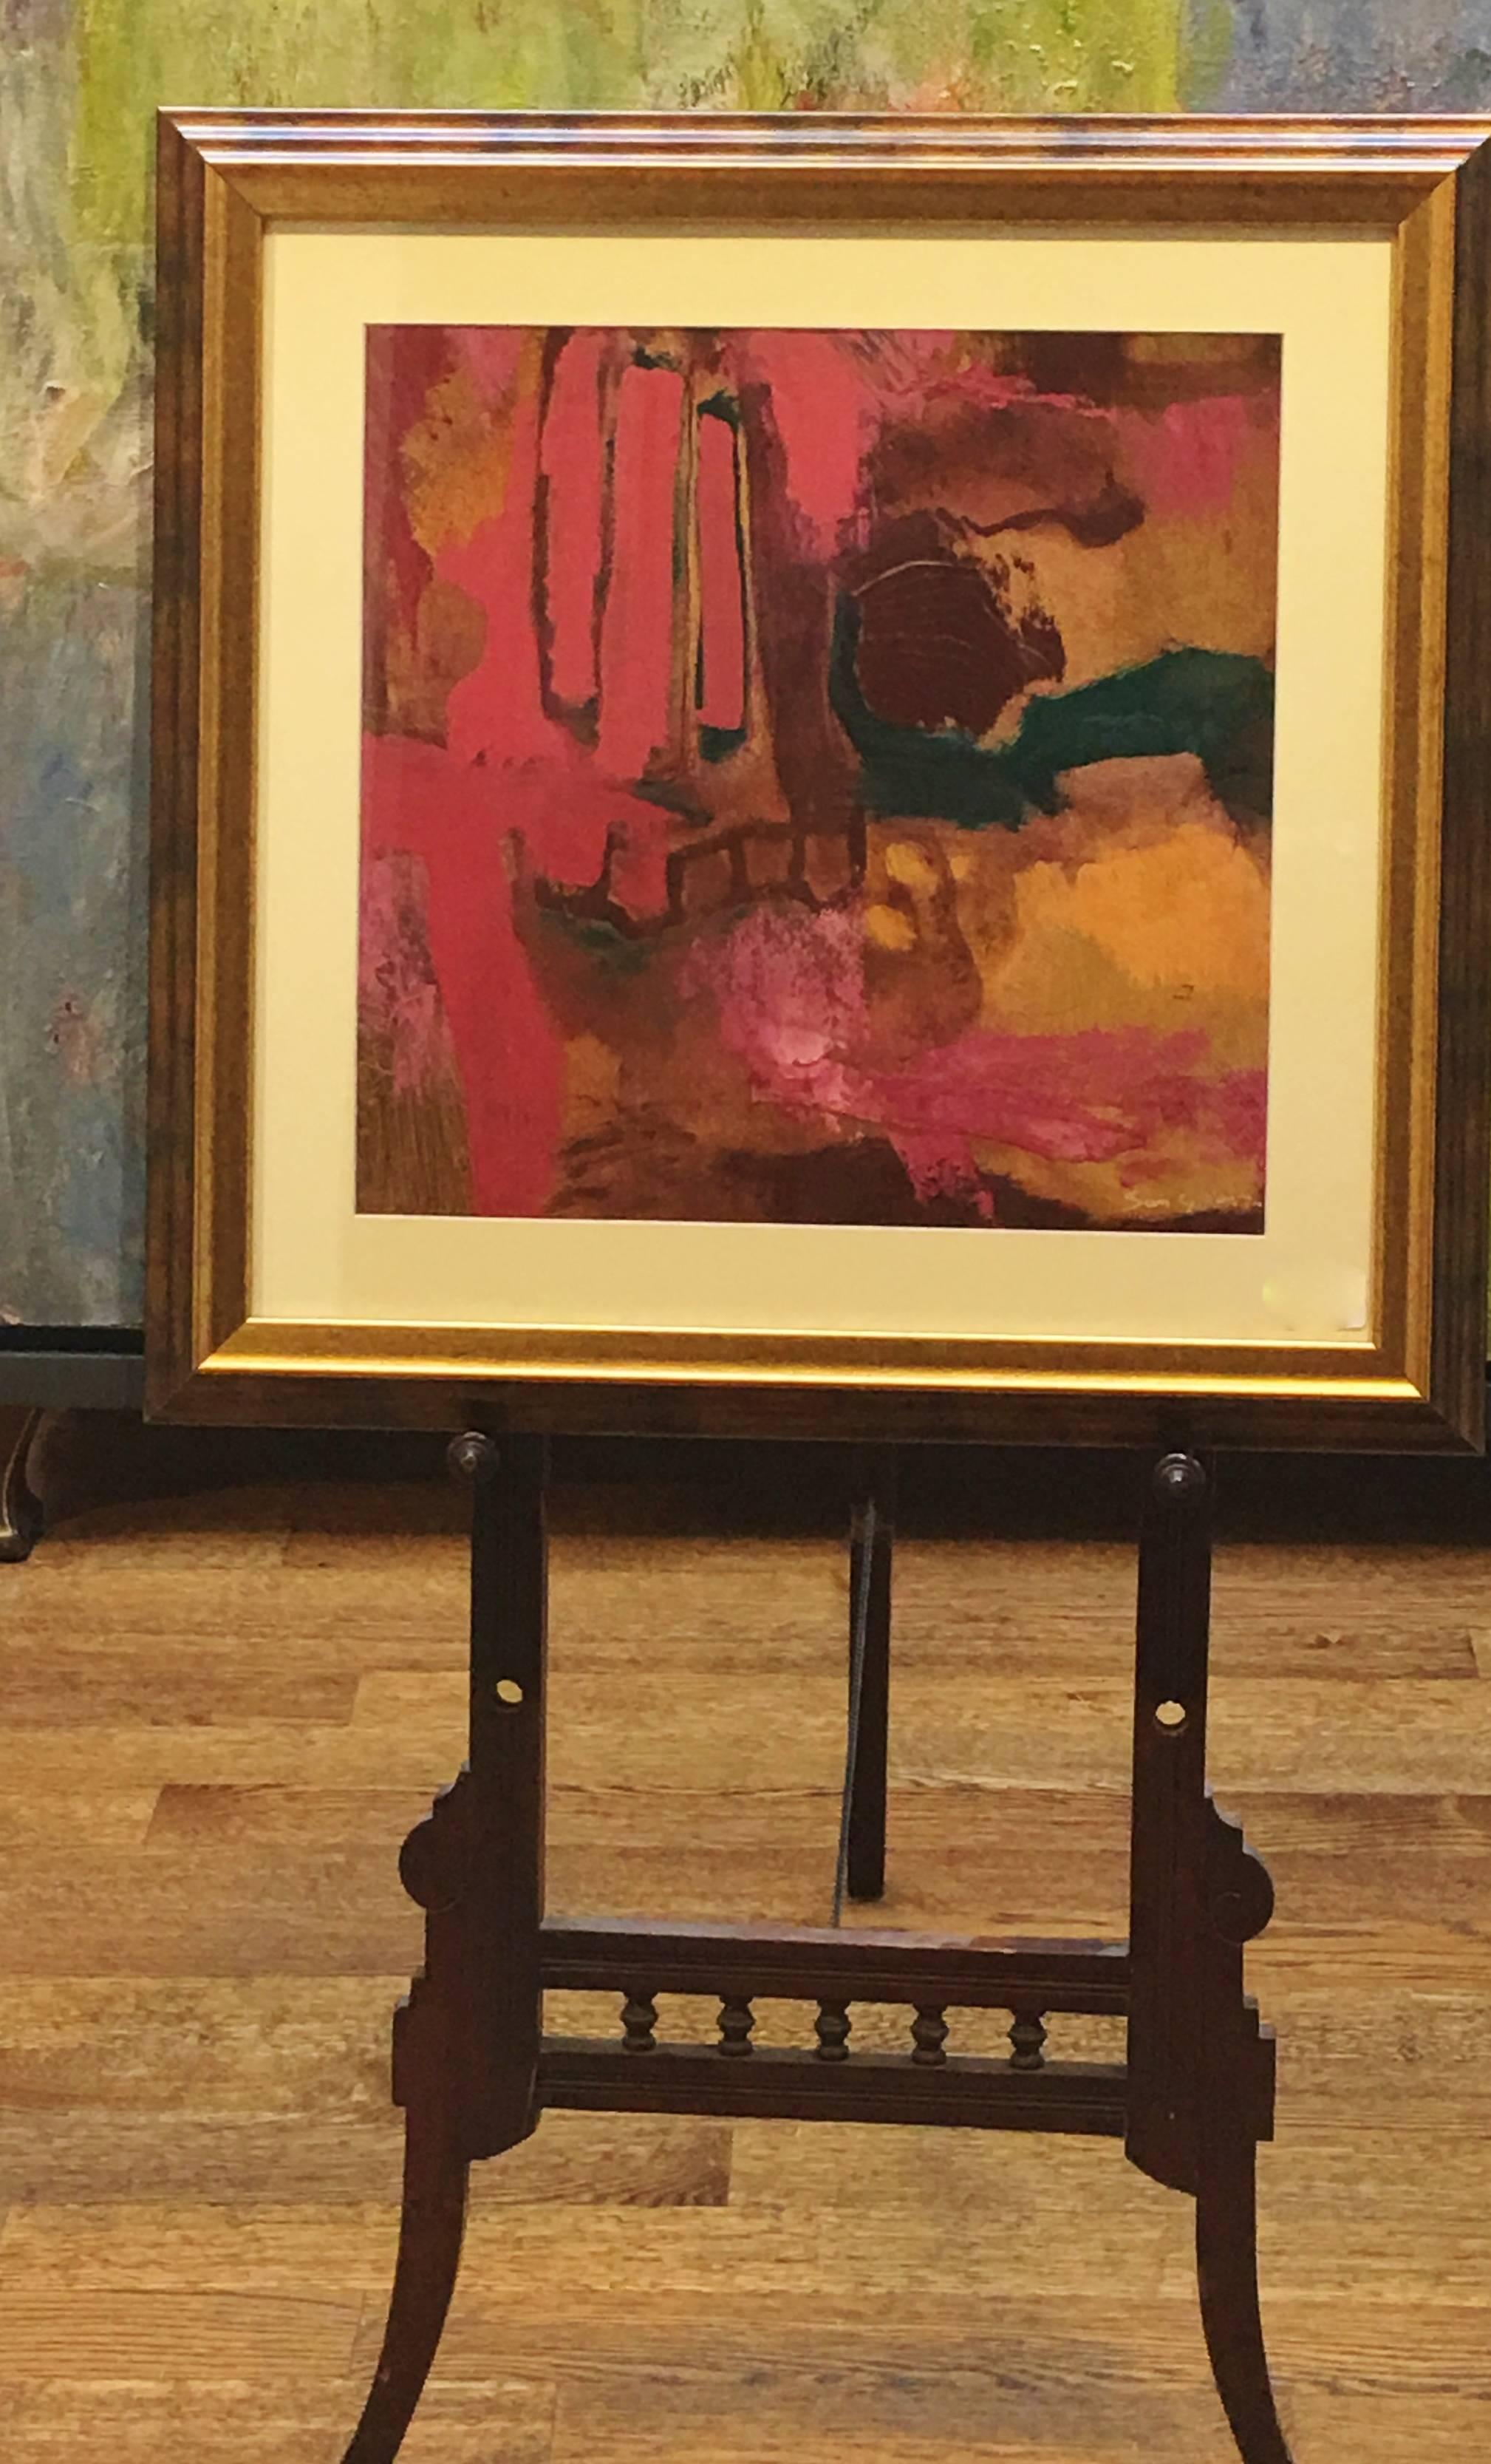 We are listing a collage painting by acclaimed African-American artist Sam Gilliam.  Gilliam (born 1933) is a color field painter and lyrical abstractionist artist associated with the Washington Color School, a group of Washington, D.C. artists that